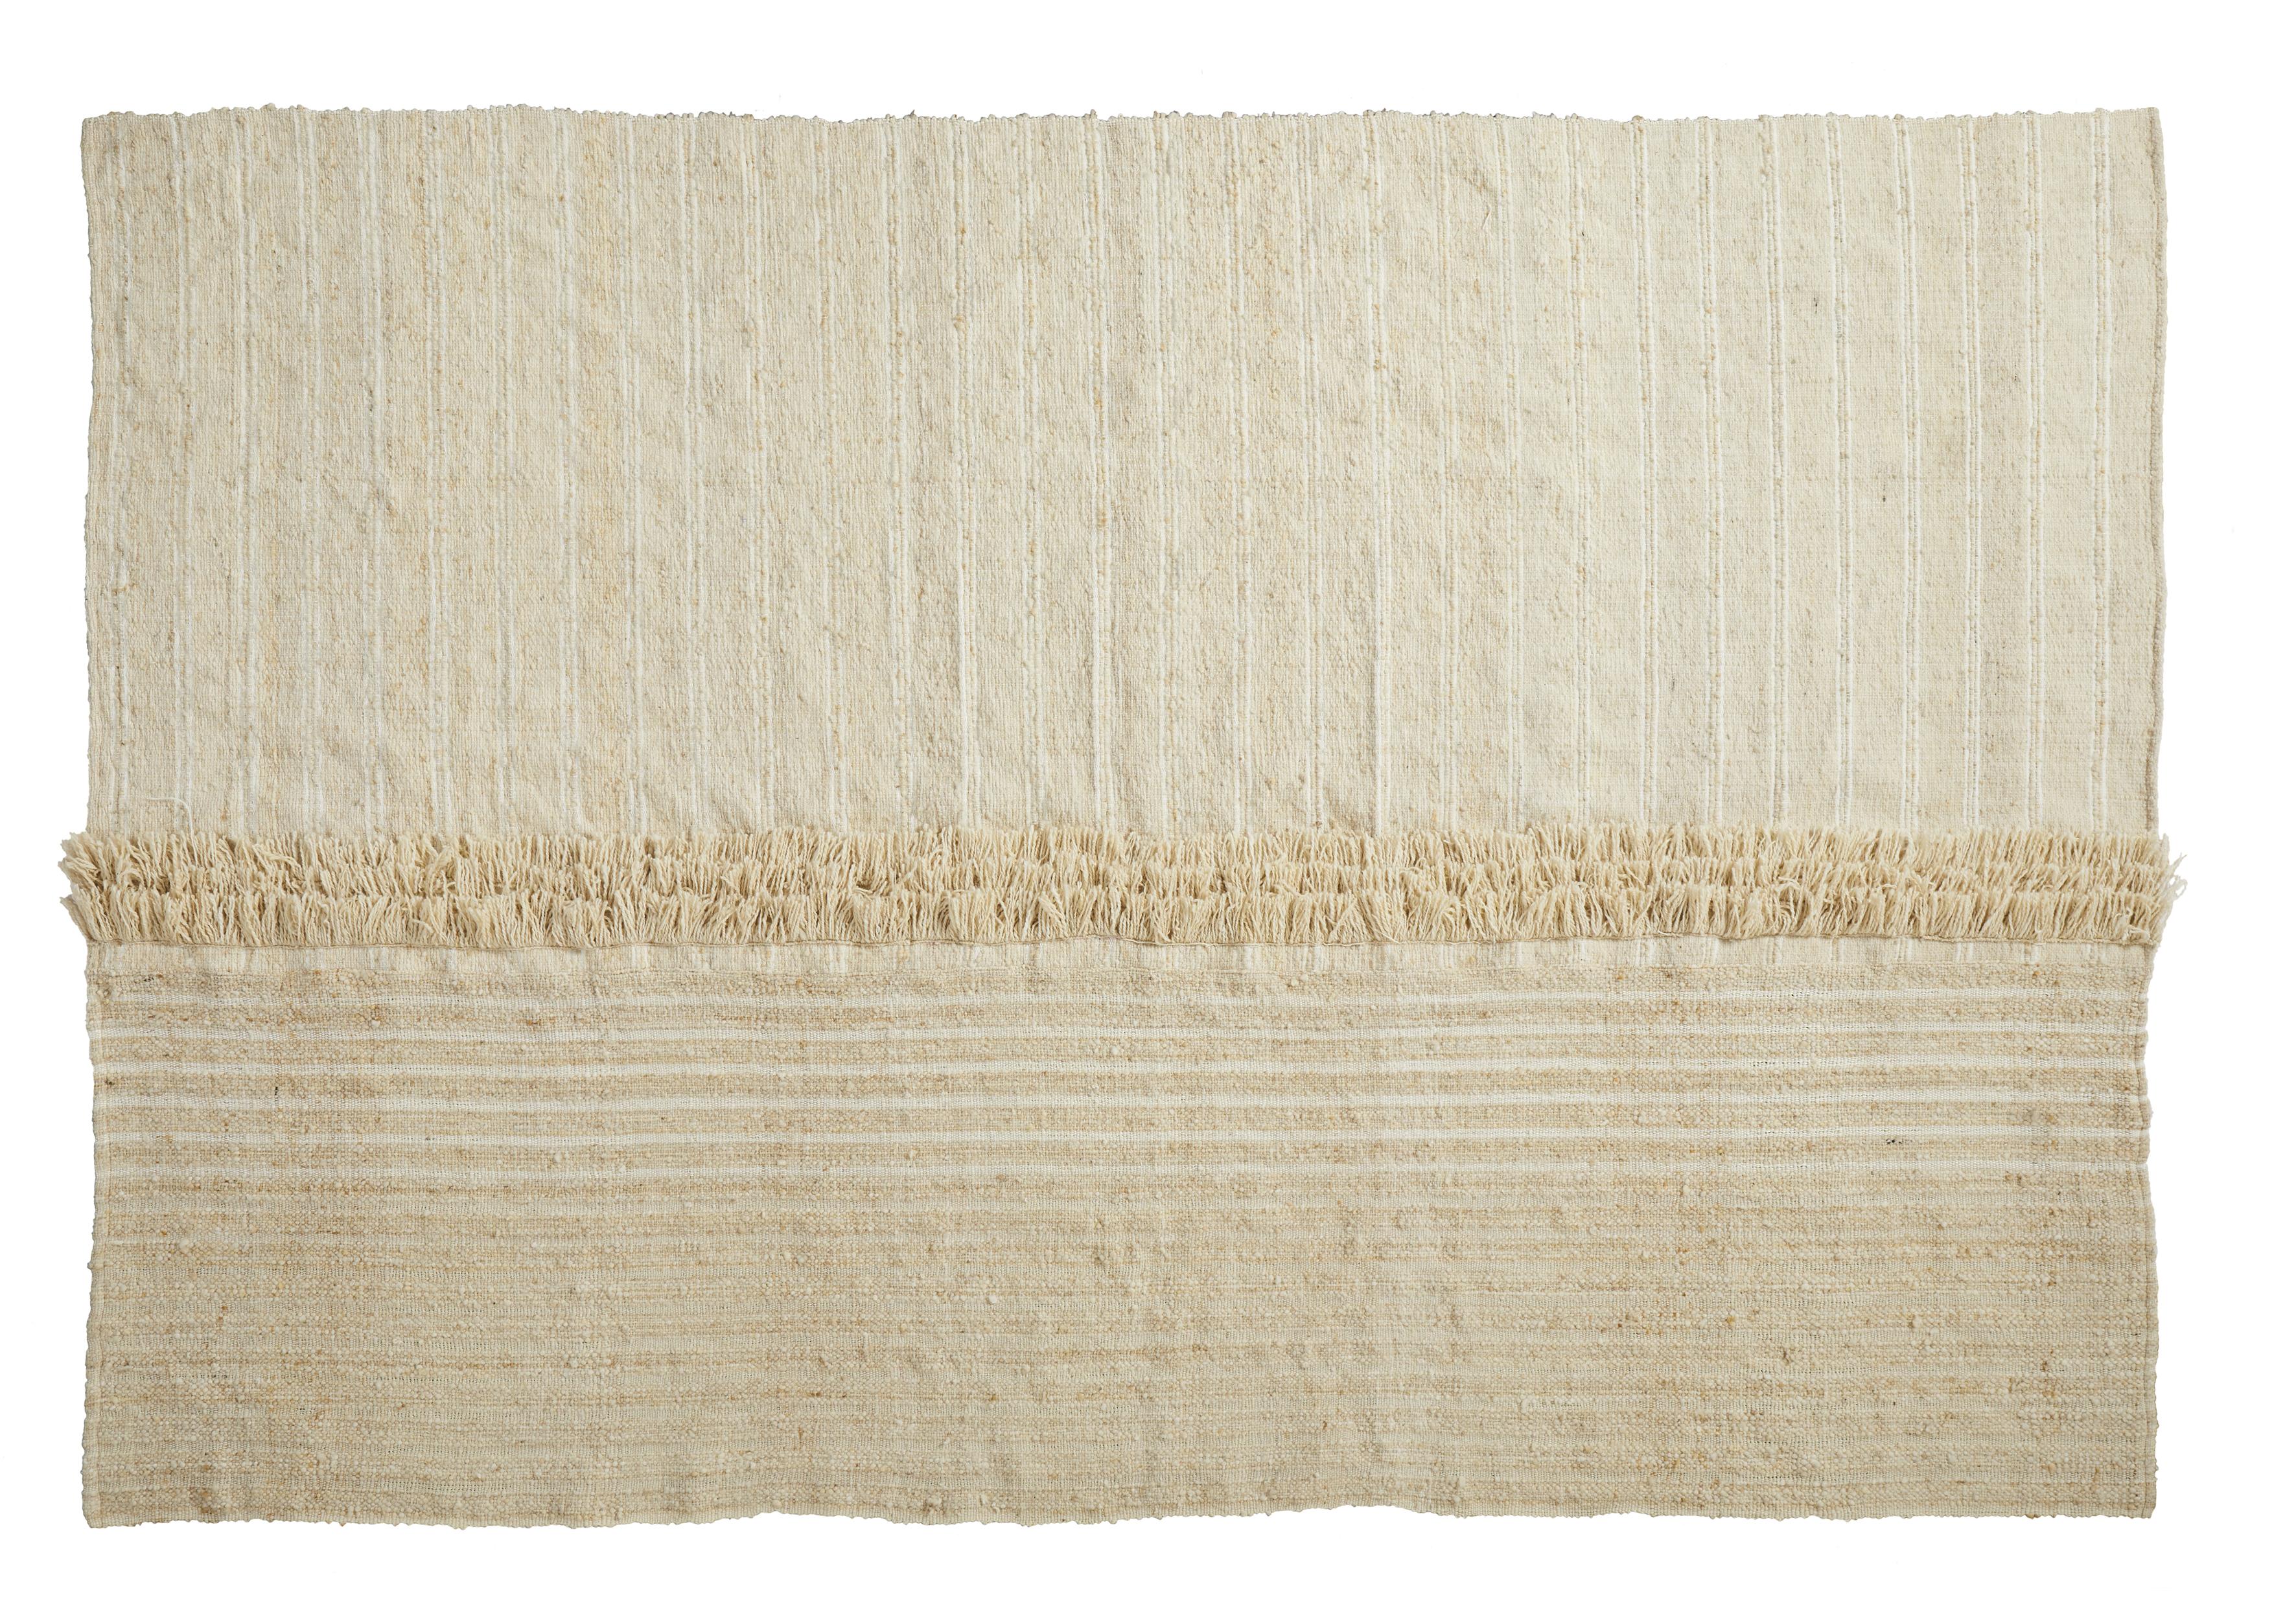 Linea 2 large subas rug by Sebastian Herkner
Materials: 100% natural virgin wool. 
Technique: Naturally dyed fibers. Hand-woven in Colombia.
Dimensions: W 310 x L 420 cm 
Available in colors: karo, linea 1, linea 2, moton, oruga. 

The Subas